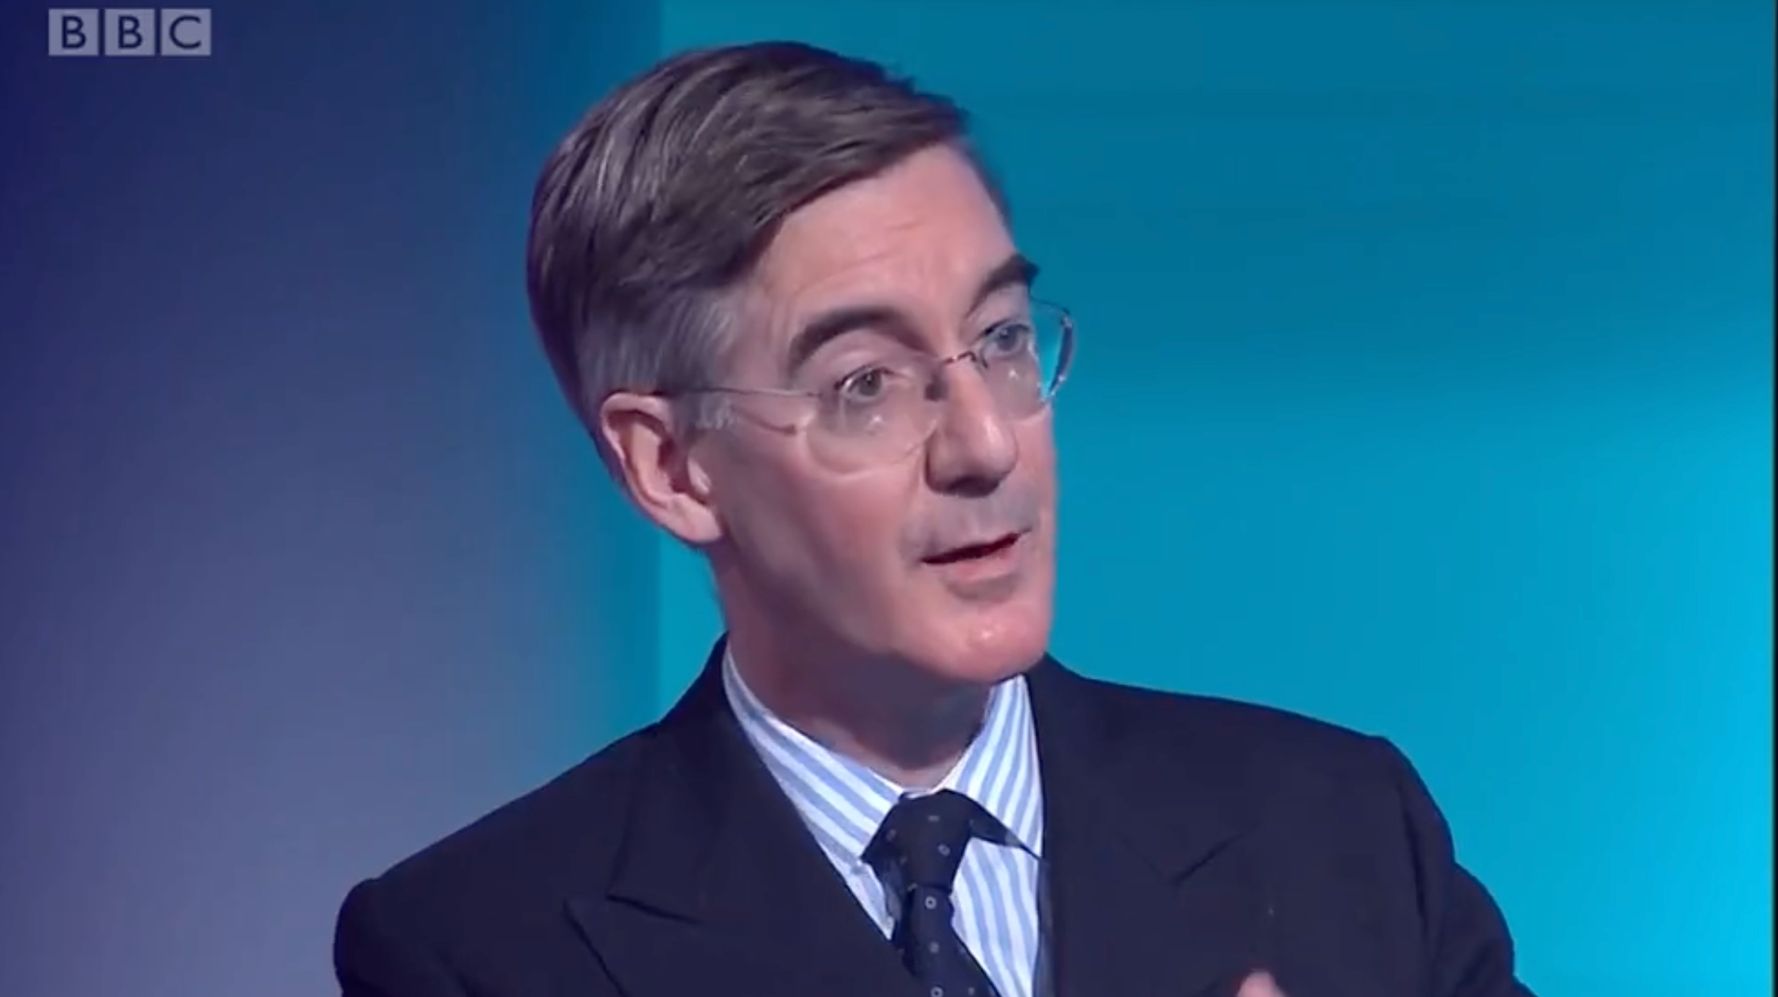 Jacob Rees-Mogg Now Thinks The UK Is 'Essentially' A Presidency